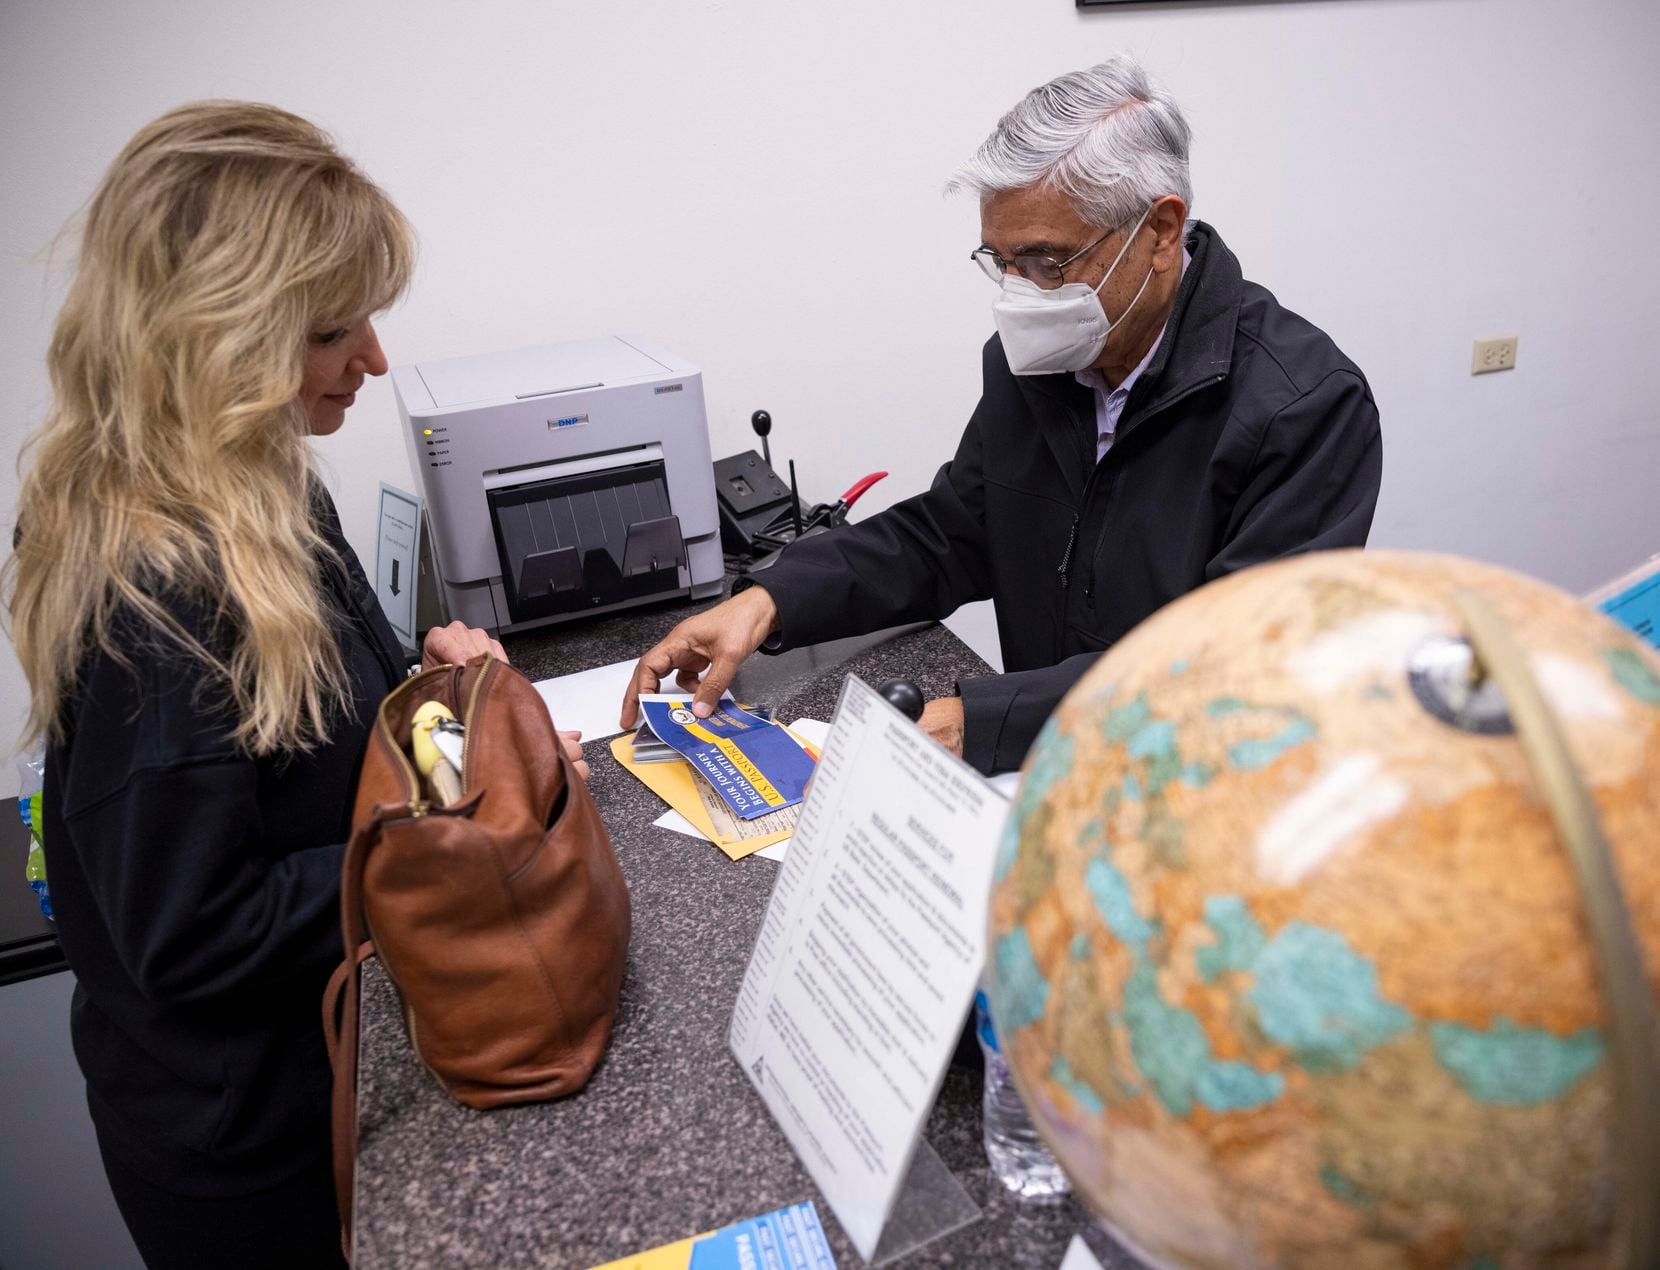 Amy Kirkland (left) of McKinney receives her passport before her trip to Canada from Madan Goyal on Wednesday, Nov. 3, 2021, at Passport and Visa Express in Plano. (Juan Figueroa/The Dallas Morning News)